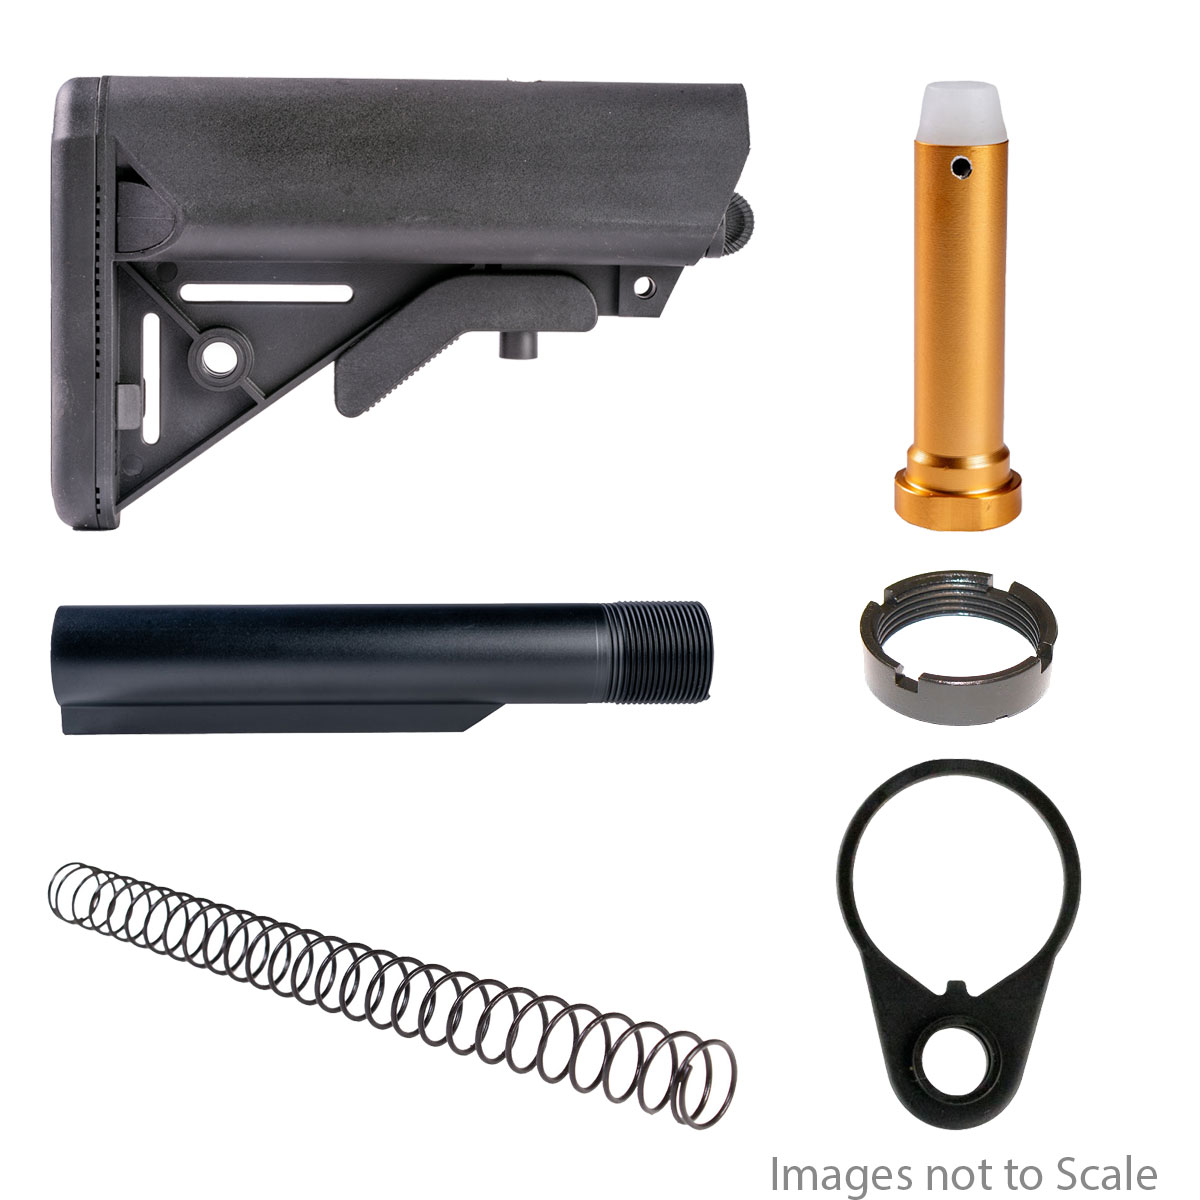 Buffer Tube Kits: Recoil Technologies End + Mil-Spec Heavy-Duty 6-Position Buffer Tube + KAK Industry LR-308 Carbine Recoil Spring + Omega Mfg. LR-308 Collapsible Stock Buffer + AR-15 Carbine Castle Nut + Gauntlet Arms Collapsible Stock 